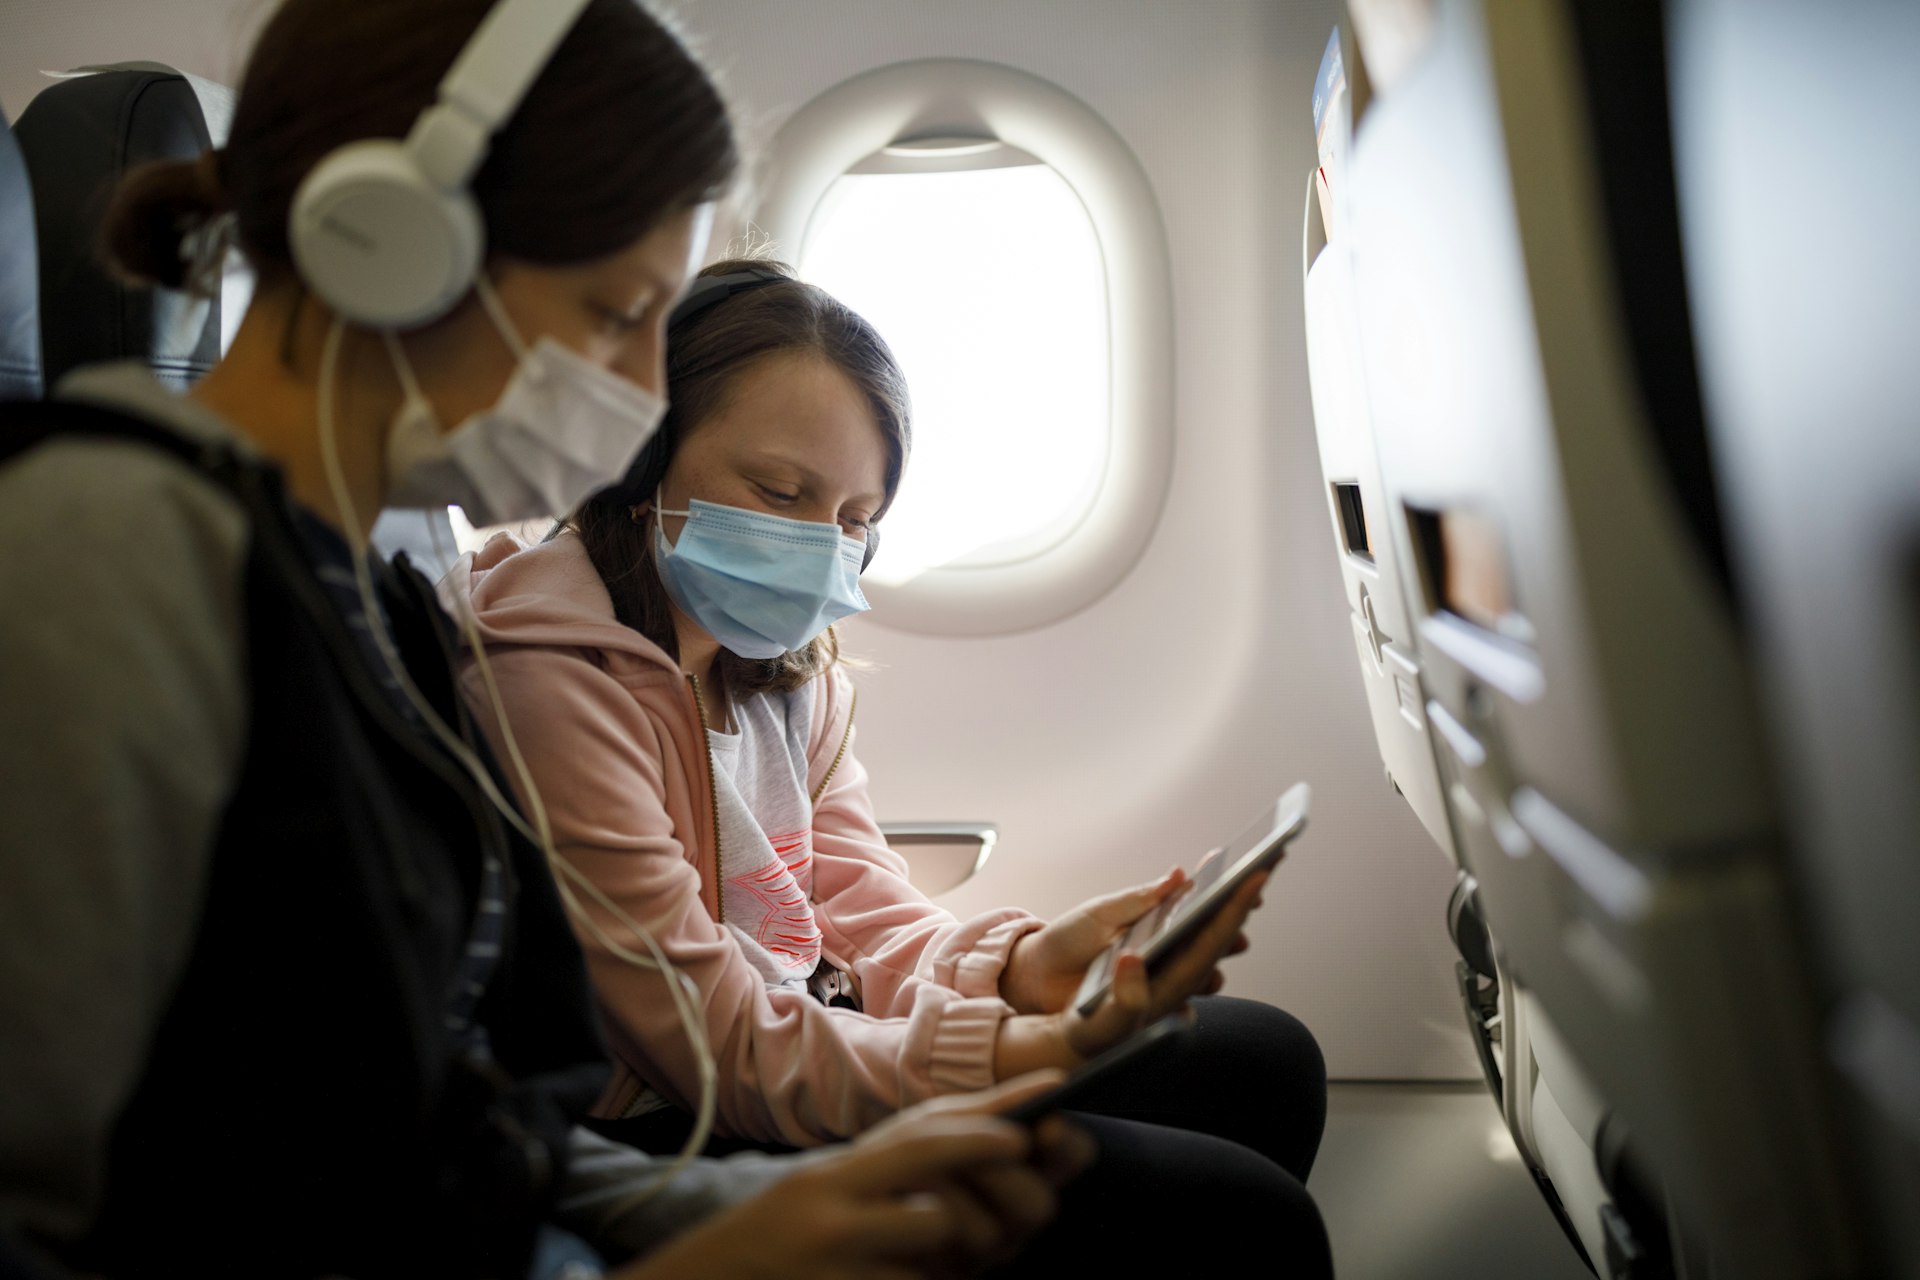 Kids with face protective mask using mobile phone in airplane